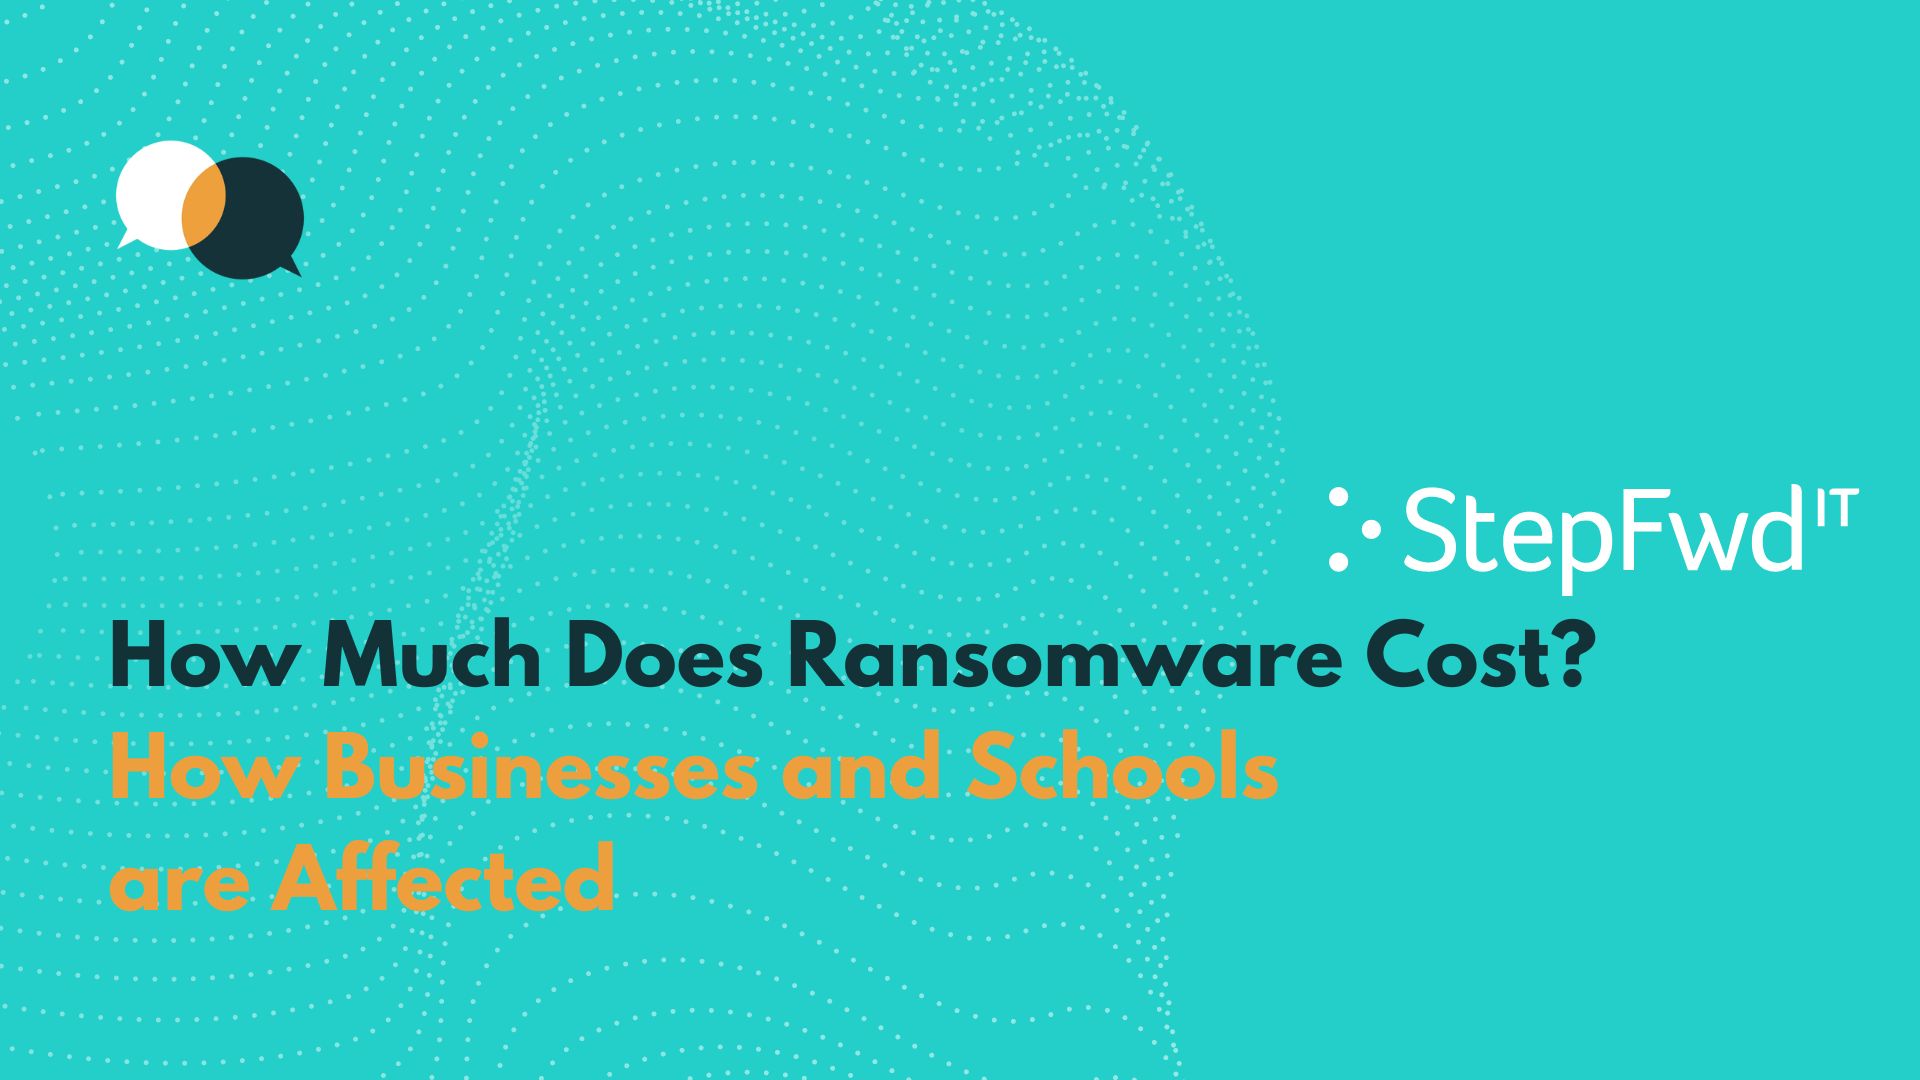 How Much Does Ransomware Cost? How Businesses and Schools Are Affected